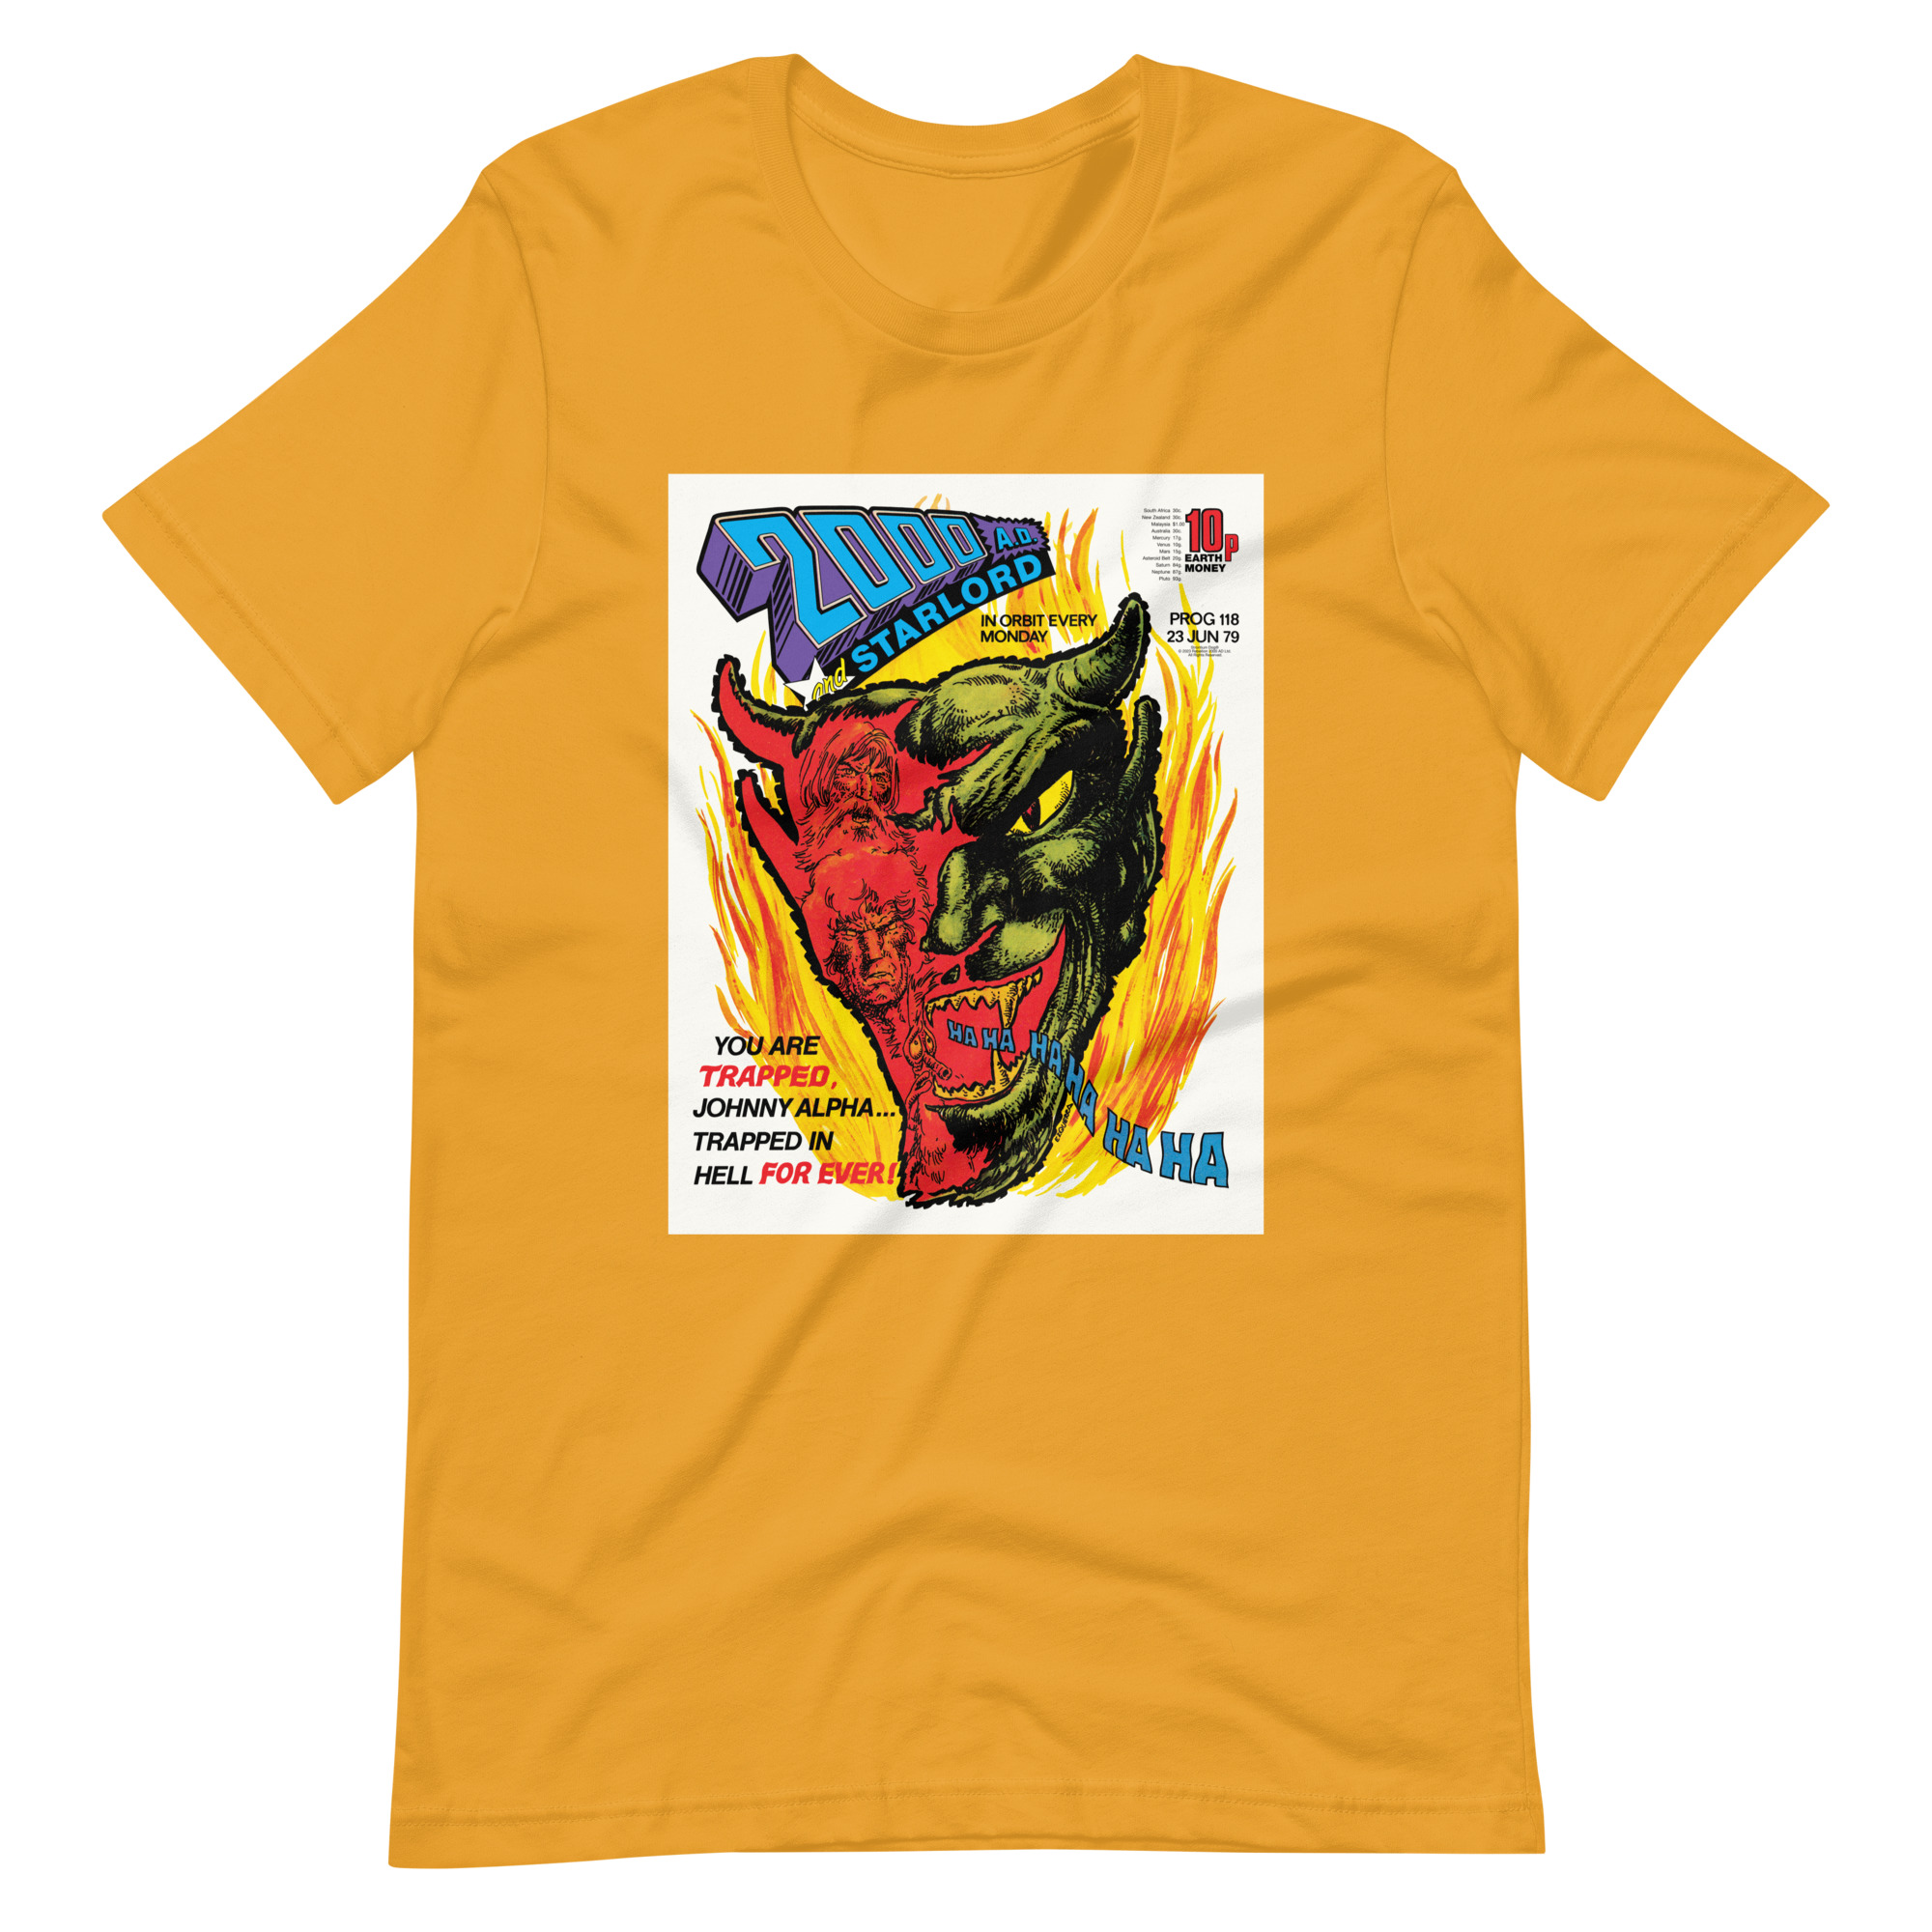 Orange Tshirt with an image on the chest. Image is cover of 2000 AD prog 118 and depicts a laughing Devil face in flames